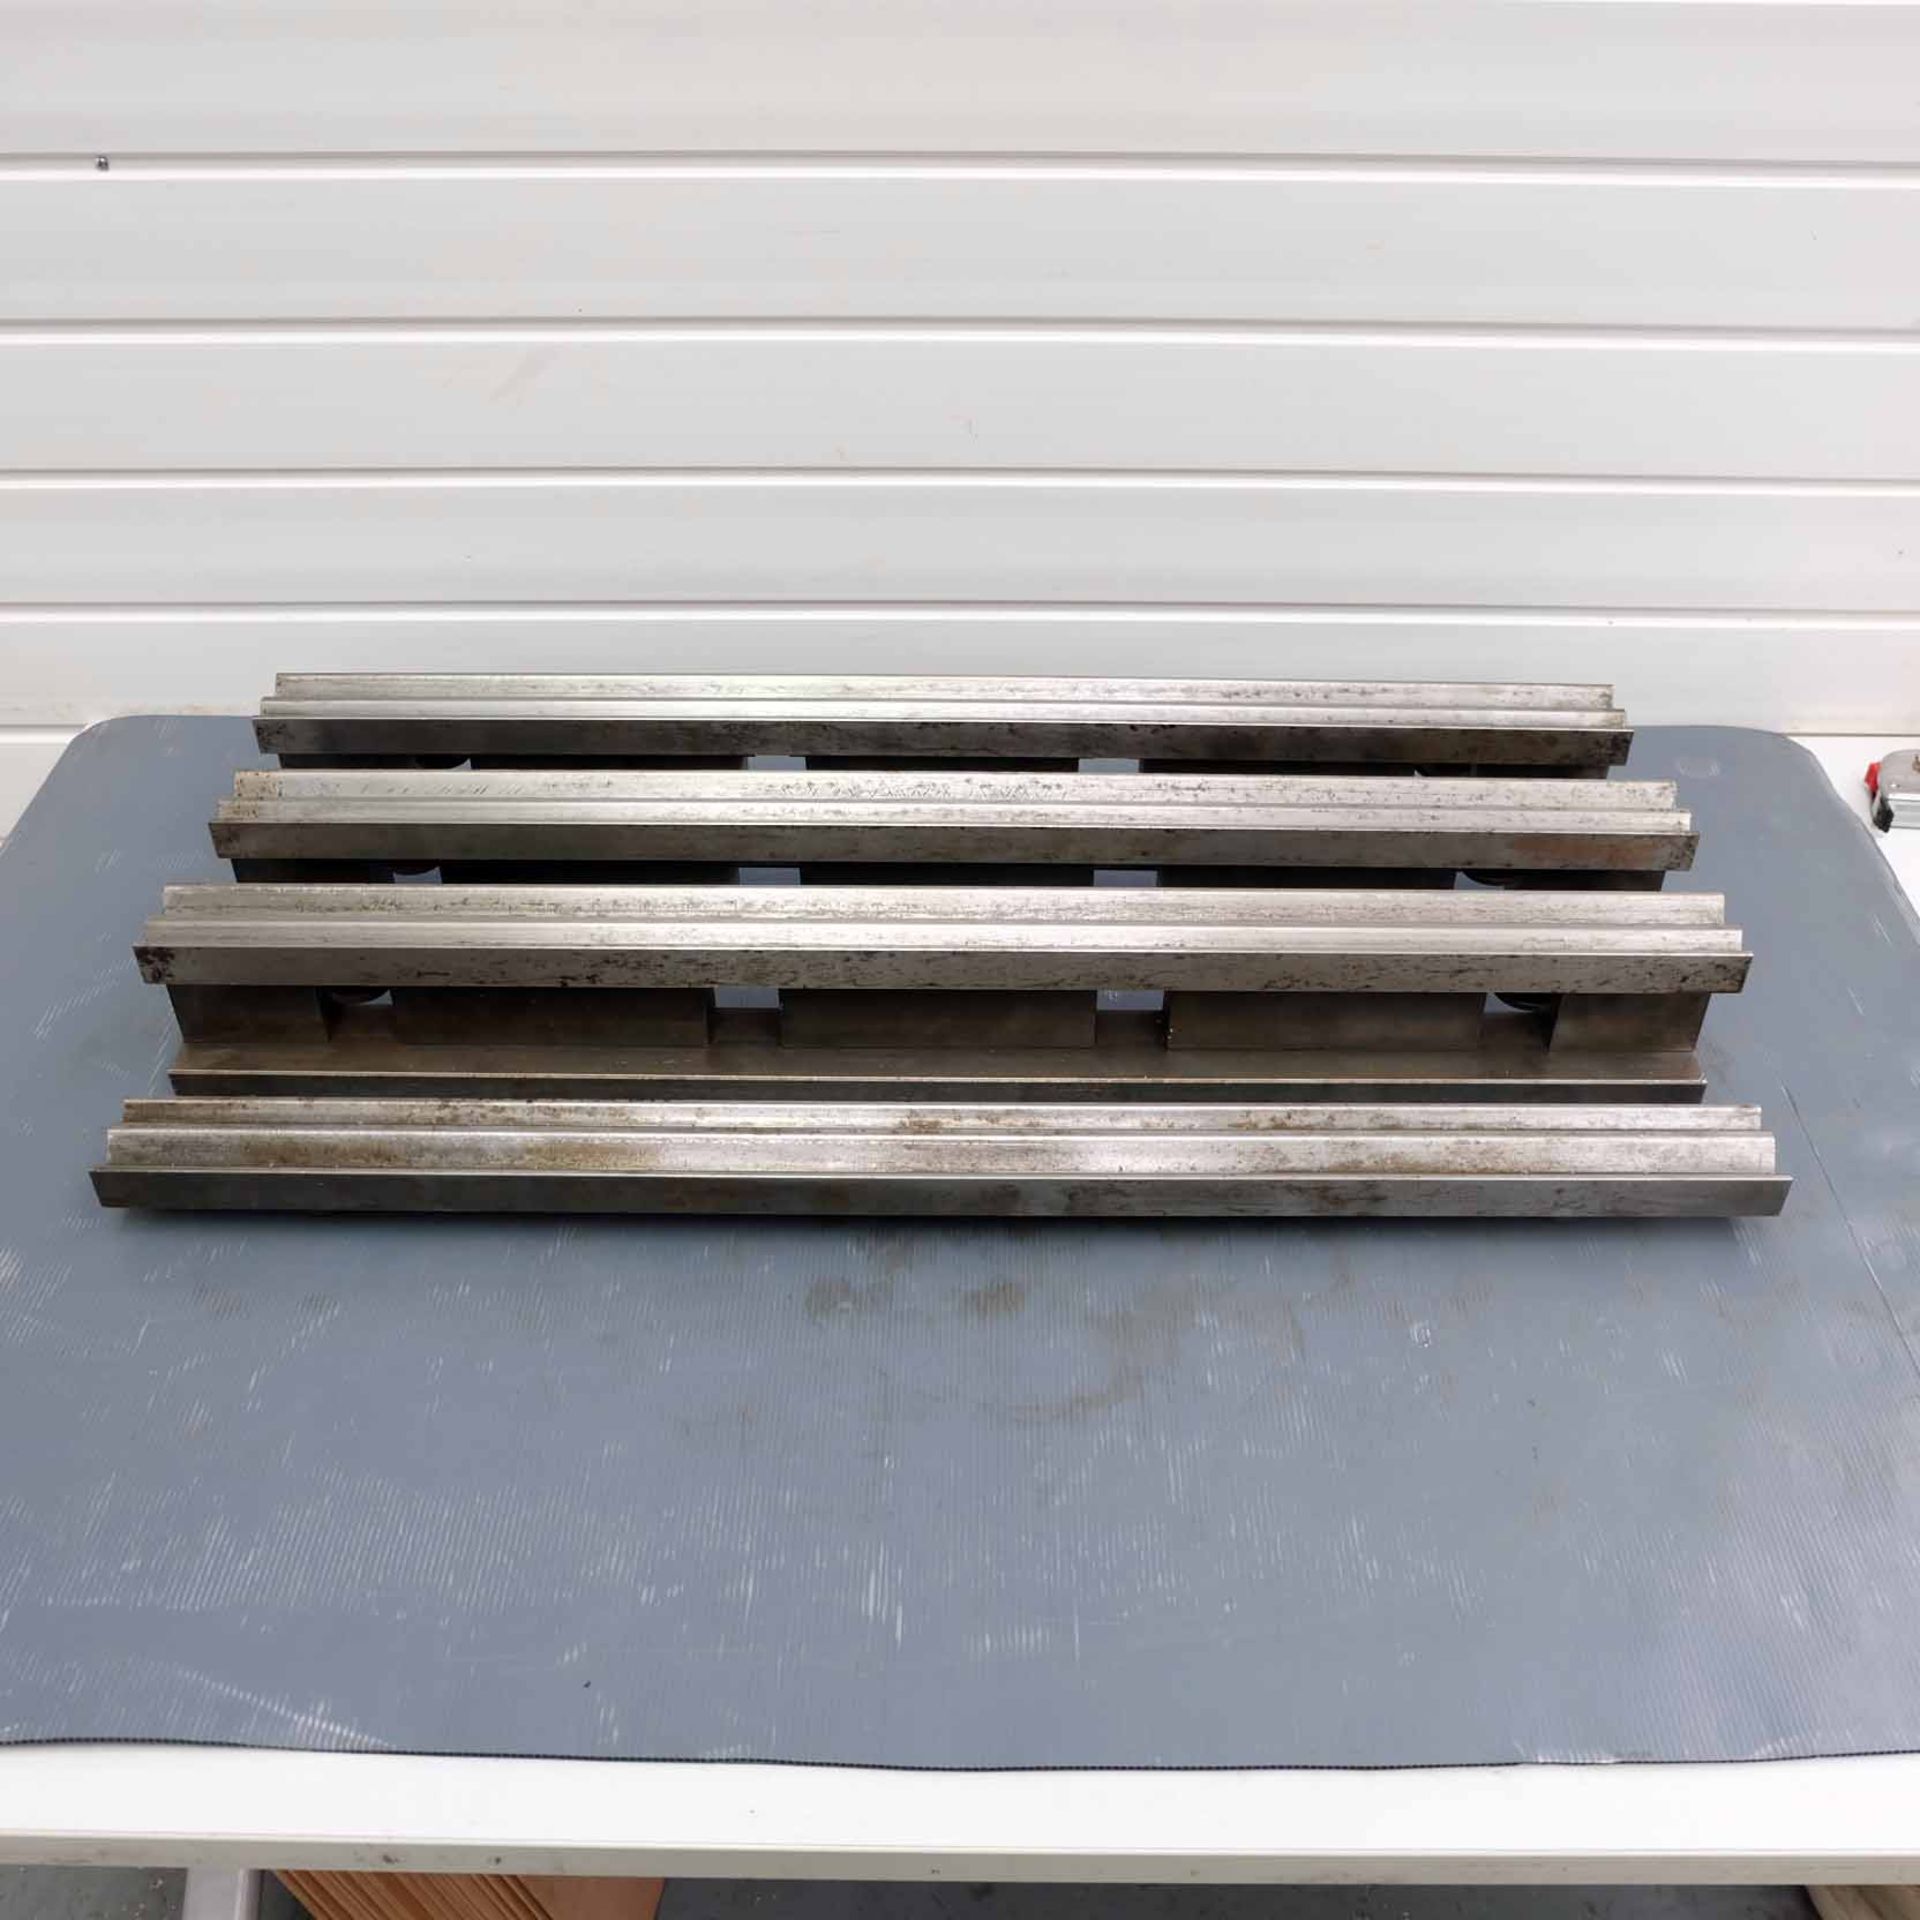 2 Vee Bottom Press Brake Tooling. 3 x 835mm With Clamping Blocks. 1 x 835mm.